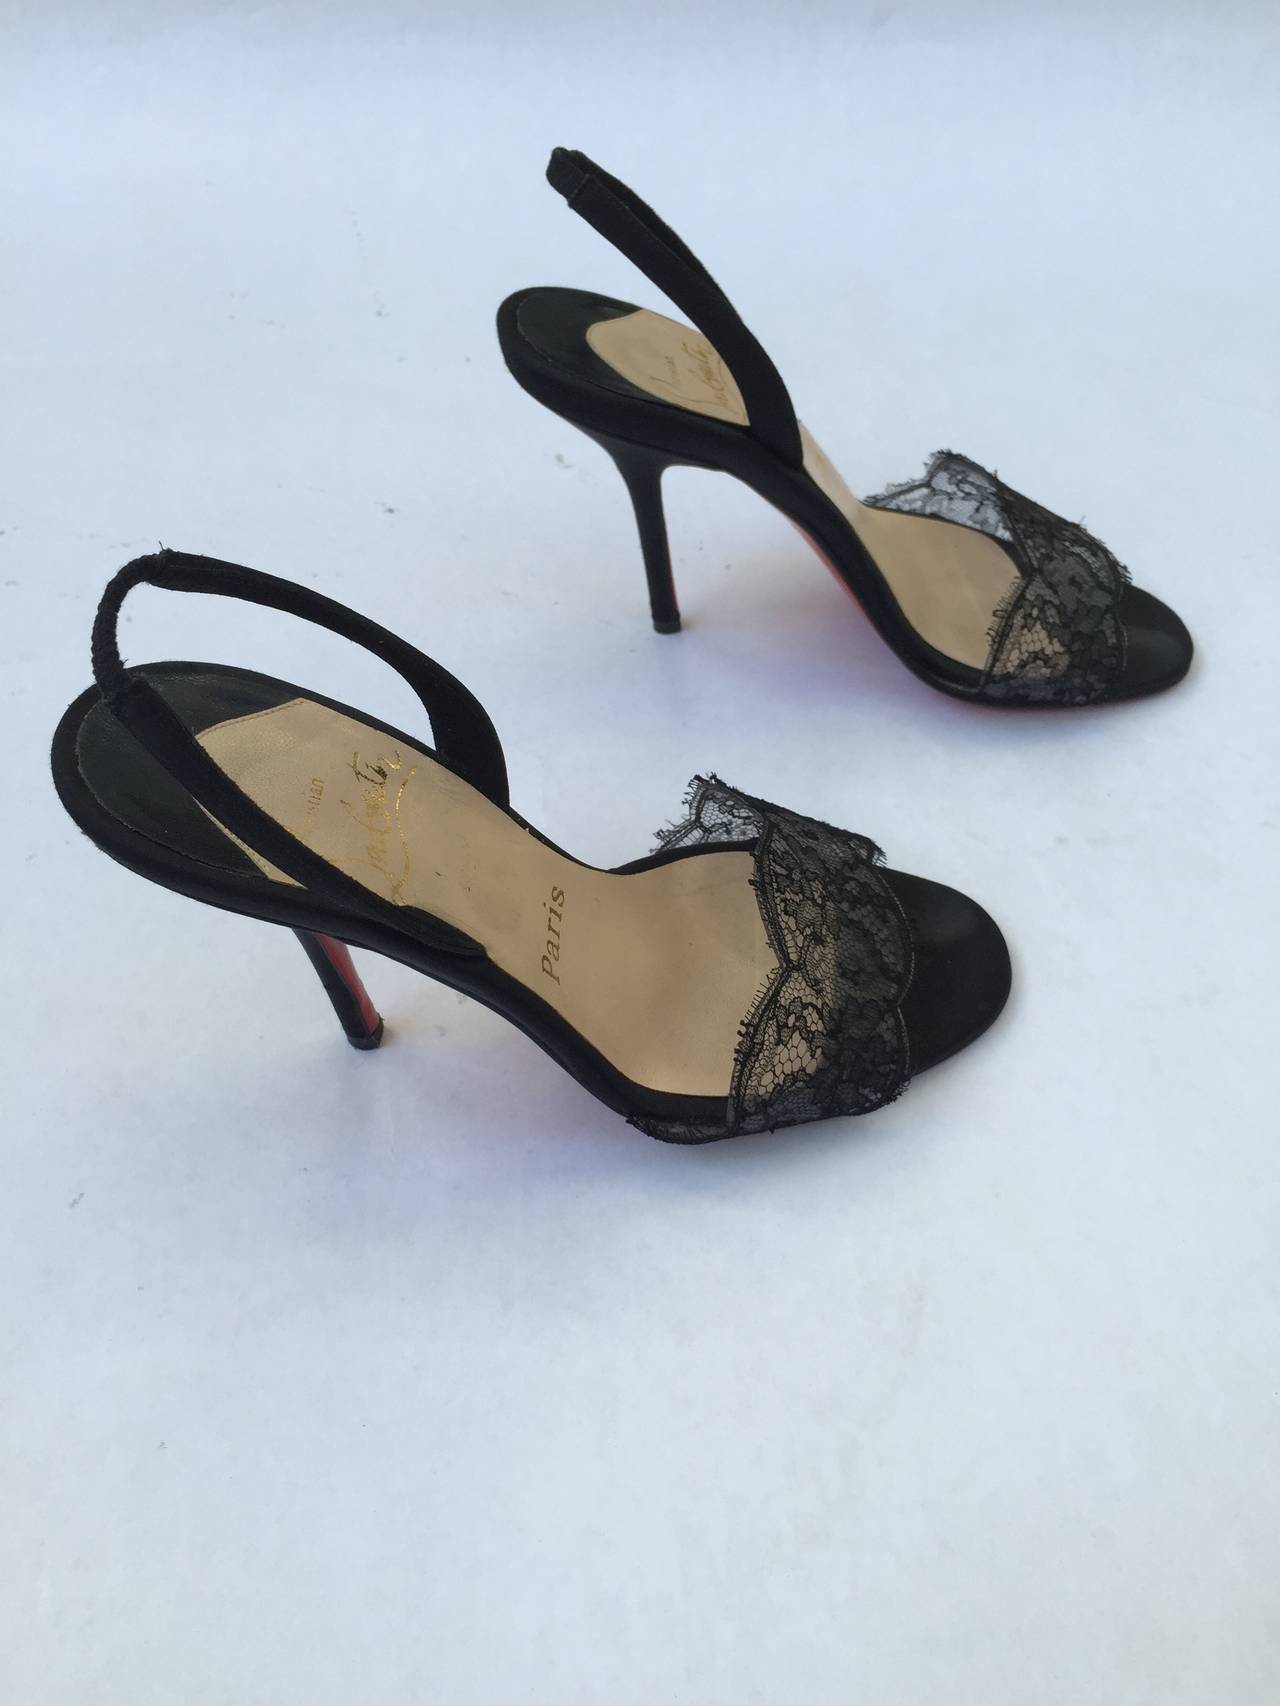 Christian Louboutin black heels with black lace front trim size 35.1/2 made in Italy. Shoe measures 9